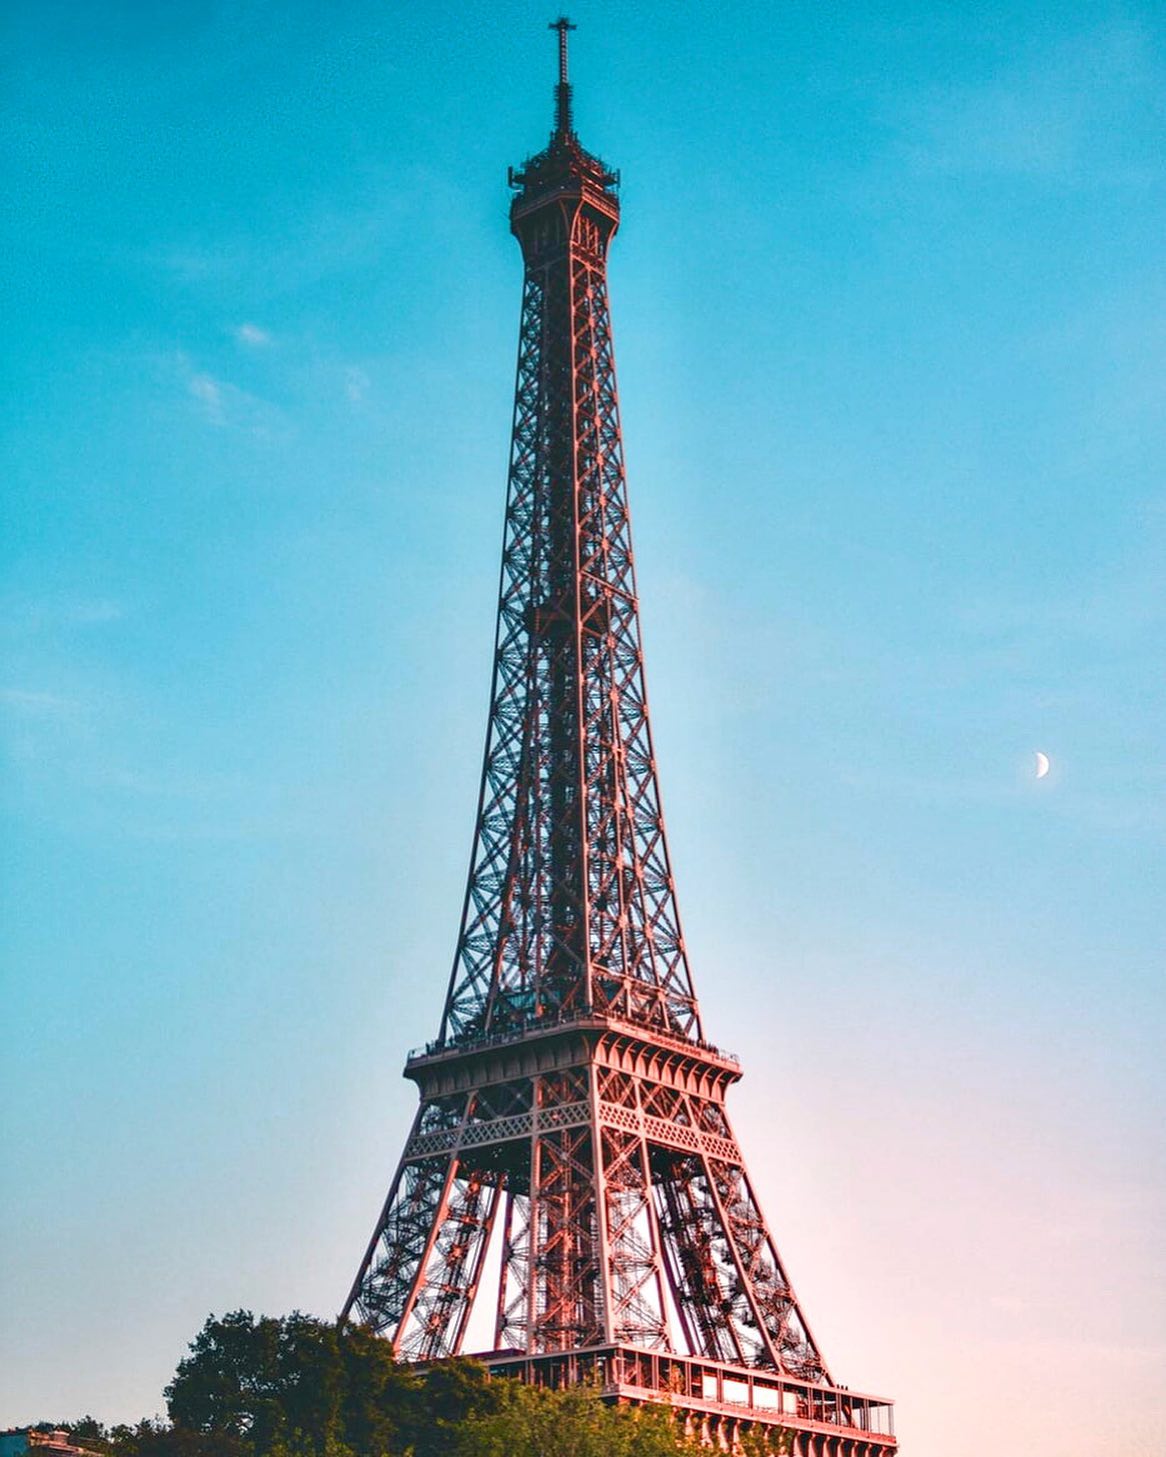 Paris, a city with typical french streets, impressive buildings and colourful cultures, is worth a visit! .
.
.
.
#roamtheplanet #eclectic_shotz #moodygrams #mg5k #moodyports #beyondthelands #thegreatplanet #worldplaces #nature_globepix #stayandwander #speechlessplaces #bestdiscovery #dreamingtravel #moodnation #earthoutdoors #earthoutdoors10k #discoverearth #paris #eiffeltower #eiffelturm #toureiffel #visitparisregion #visitparis #visitfrance #france #frankreich #frankreich🇫🇷